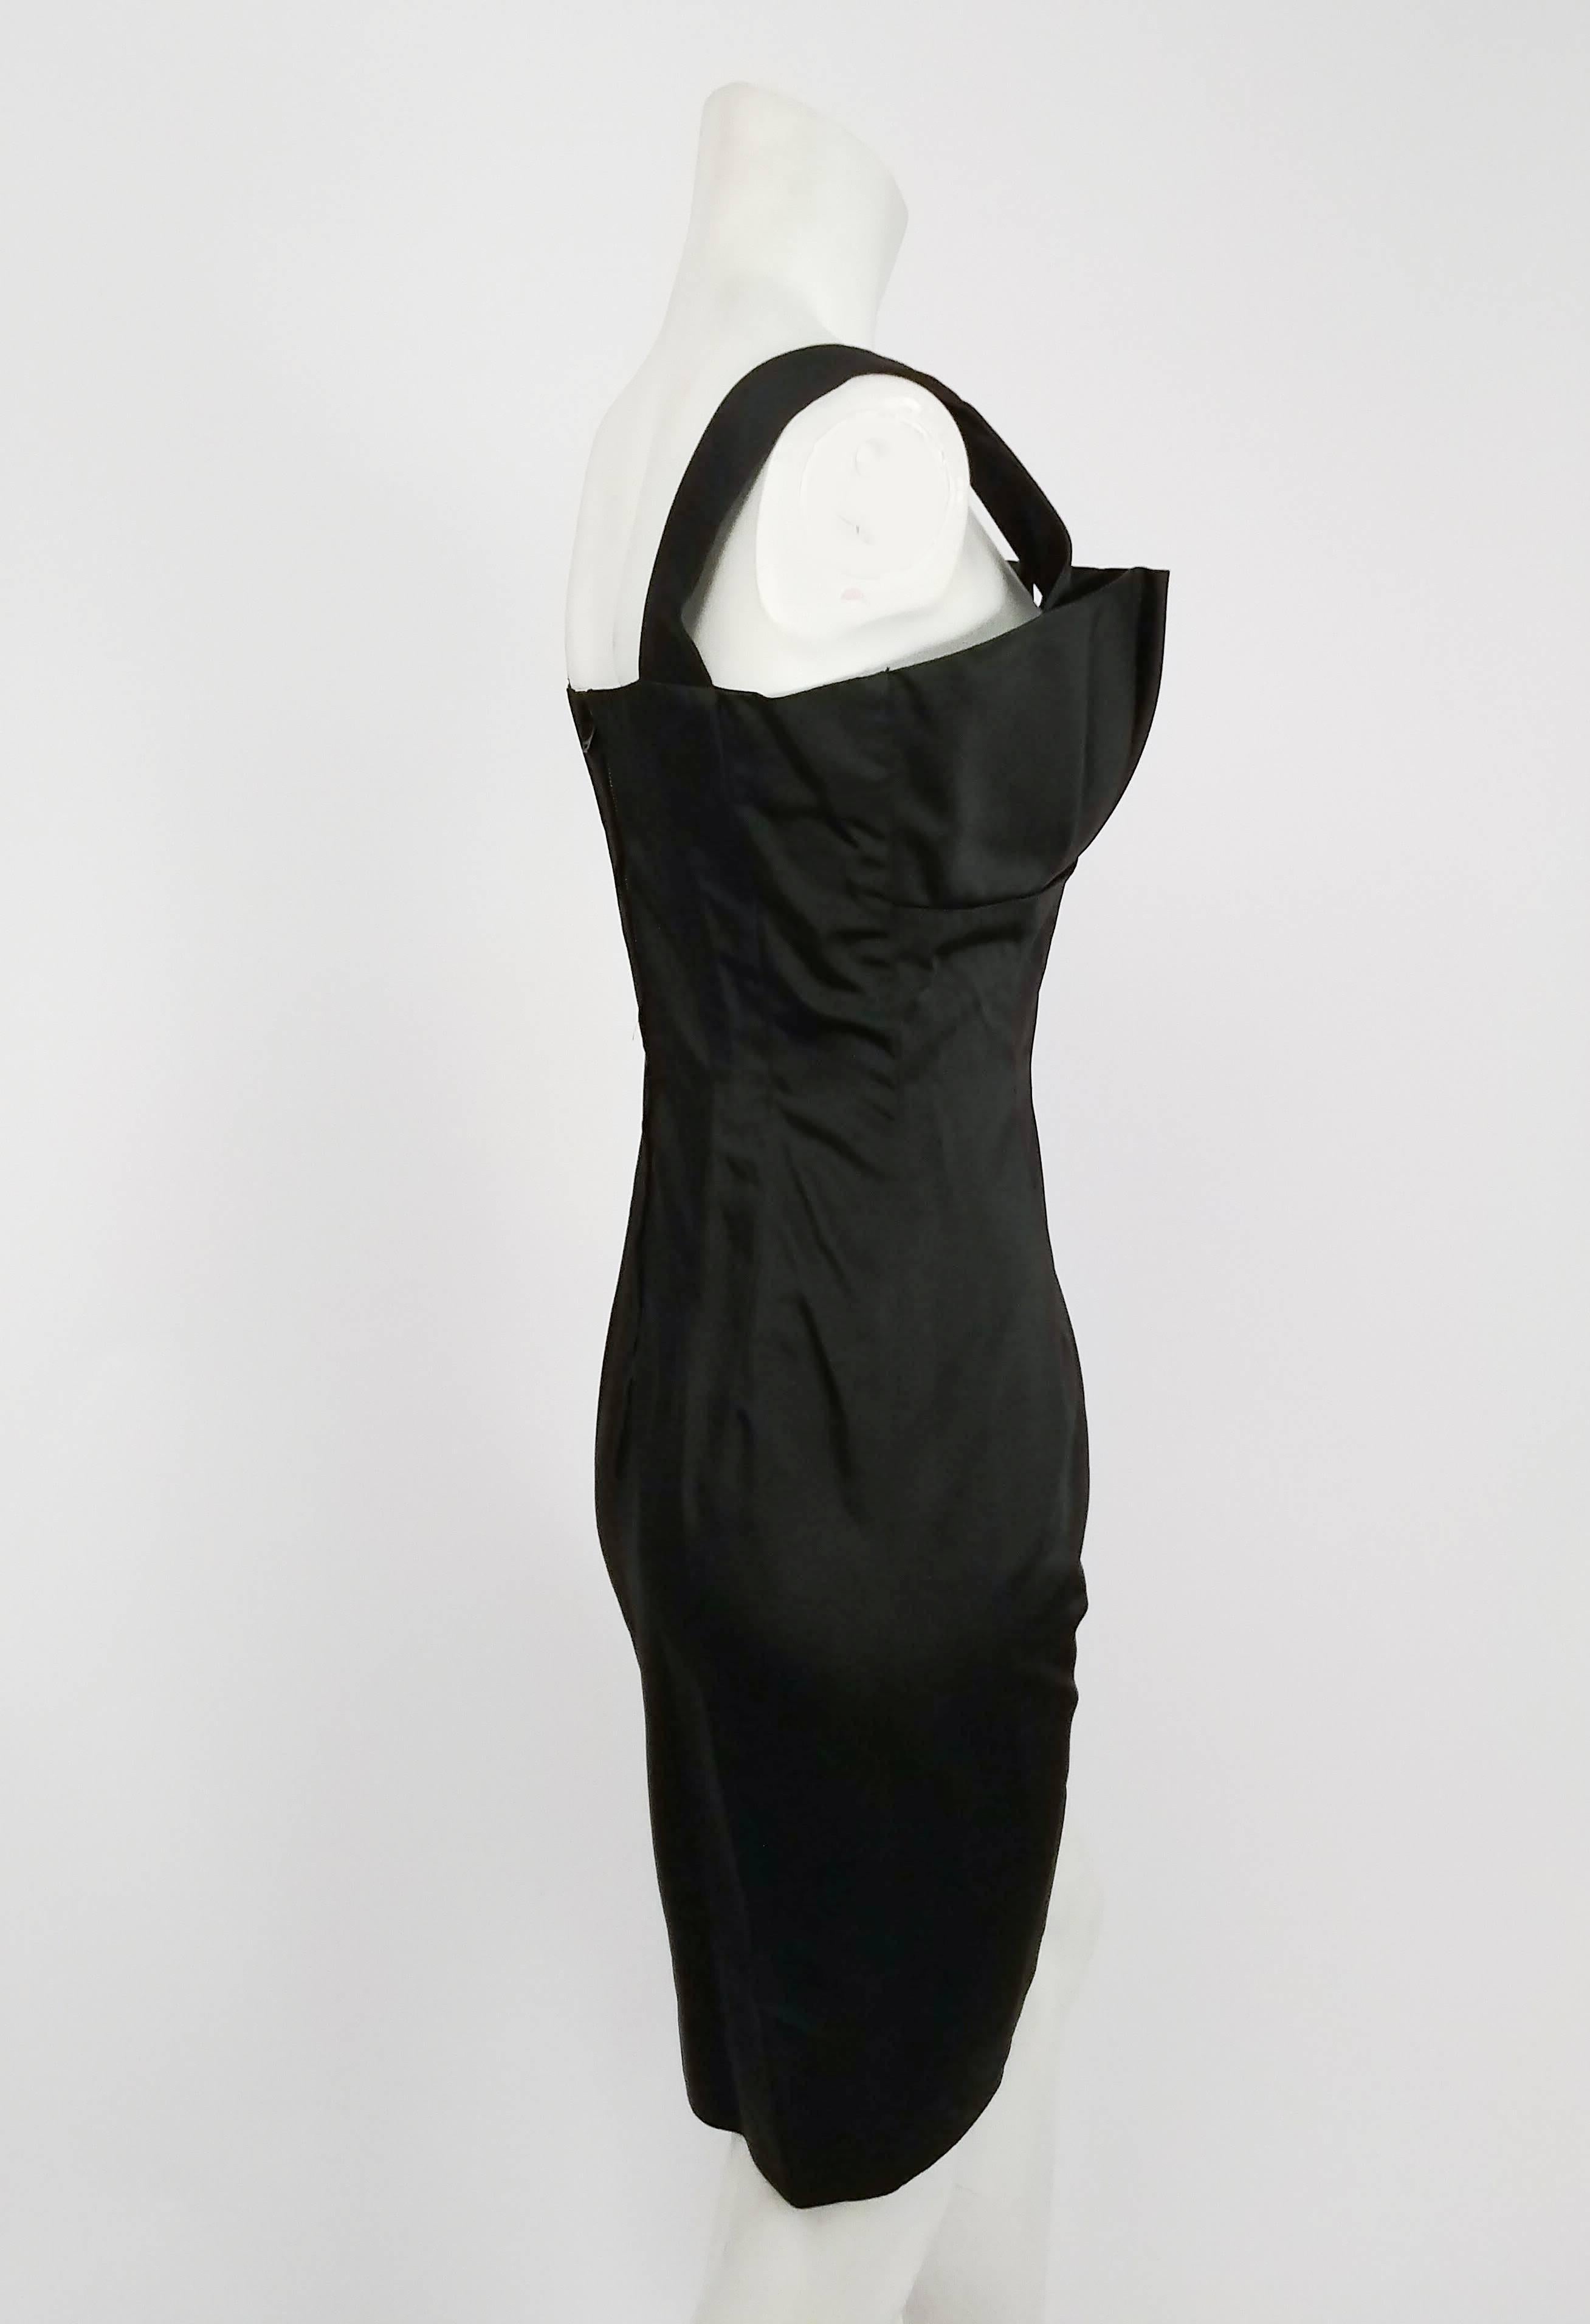 1960s Satin Cocktail Dress. Pleated front cups, square neckline with thick shoulder straps. Fitted waist and skirt.